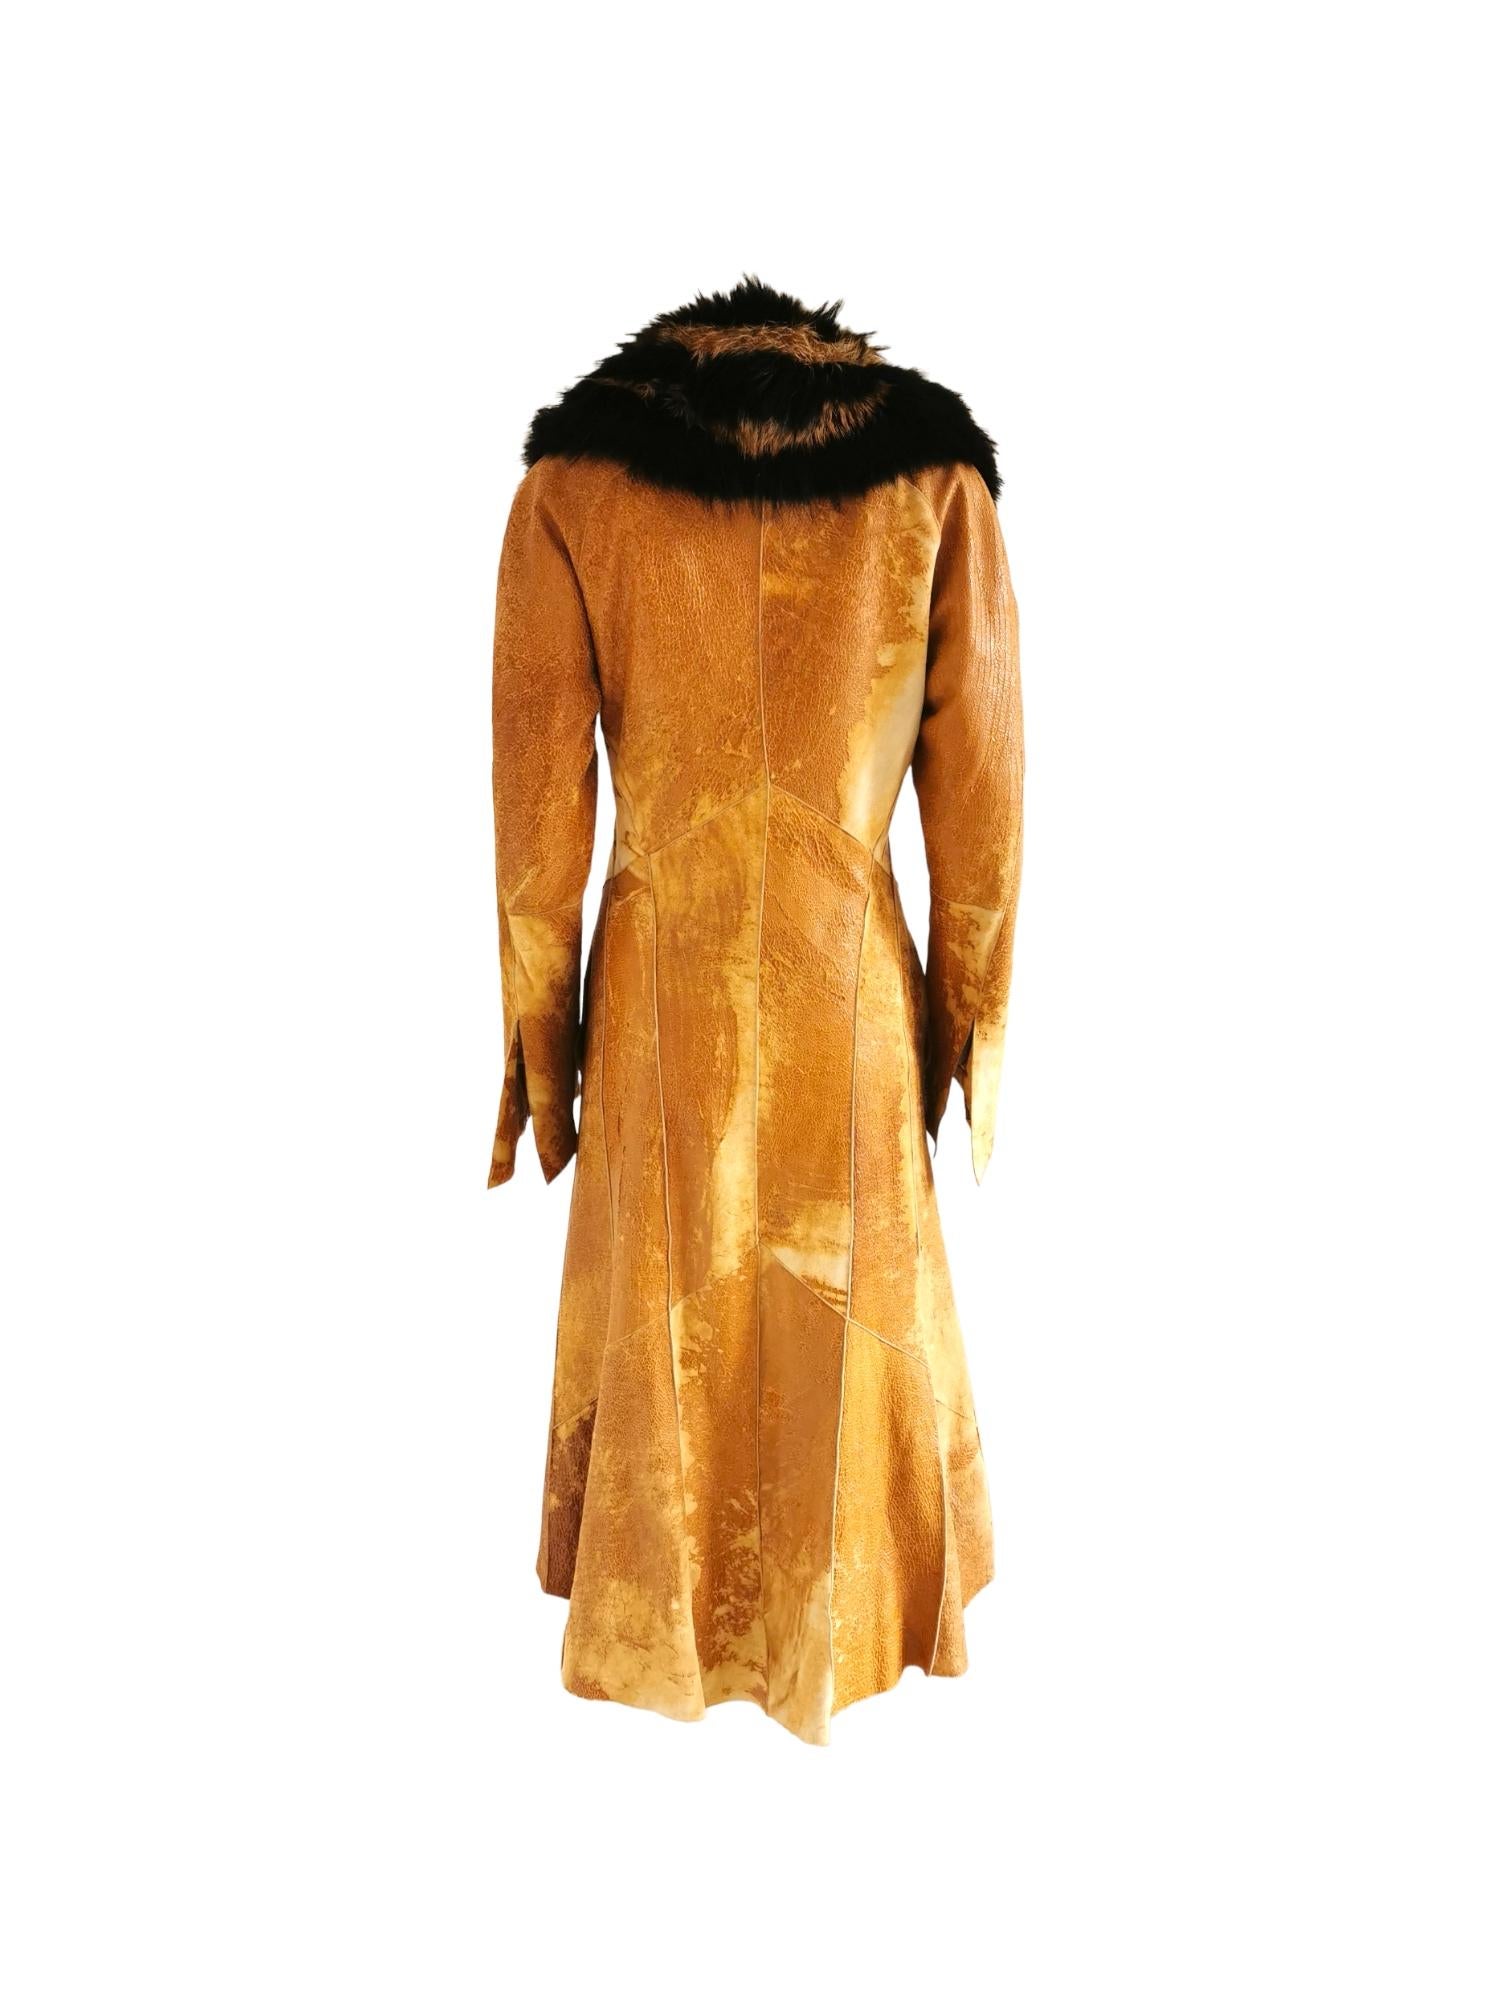 MY Runway Archive presents this beautiful and rare Roberto Cavalli leather coat with fur collar and silk patchwork print lining from the FW 2002 collection.

Material: Outer - leather; Collar - fur; Lining - silk

Condition: Very good. Please note